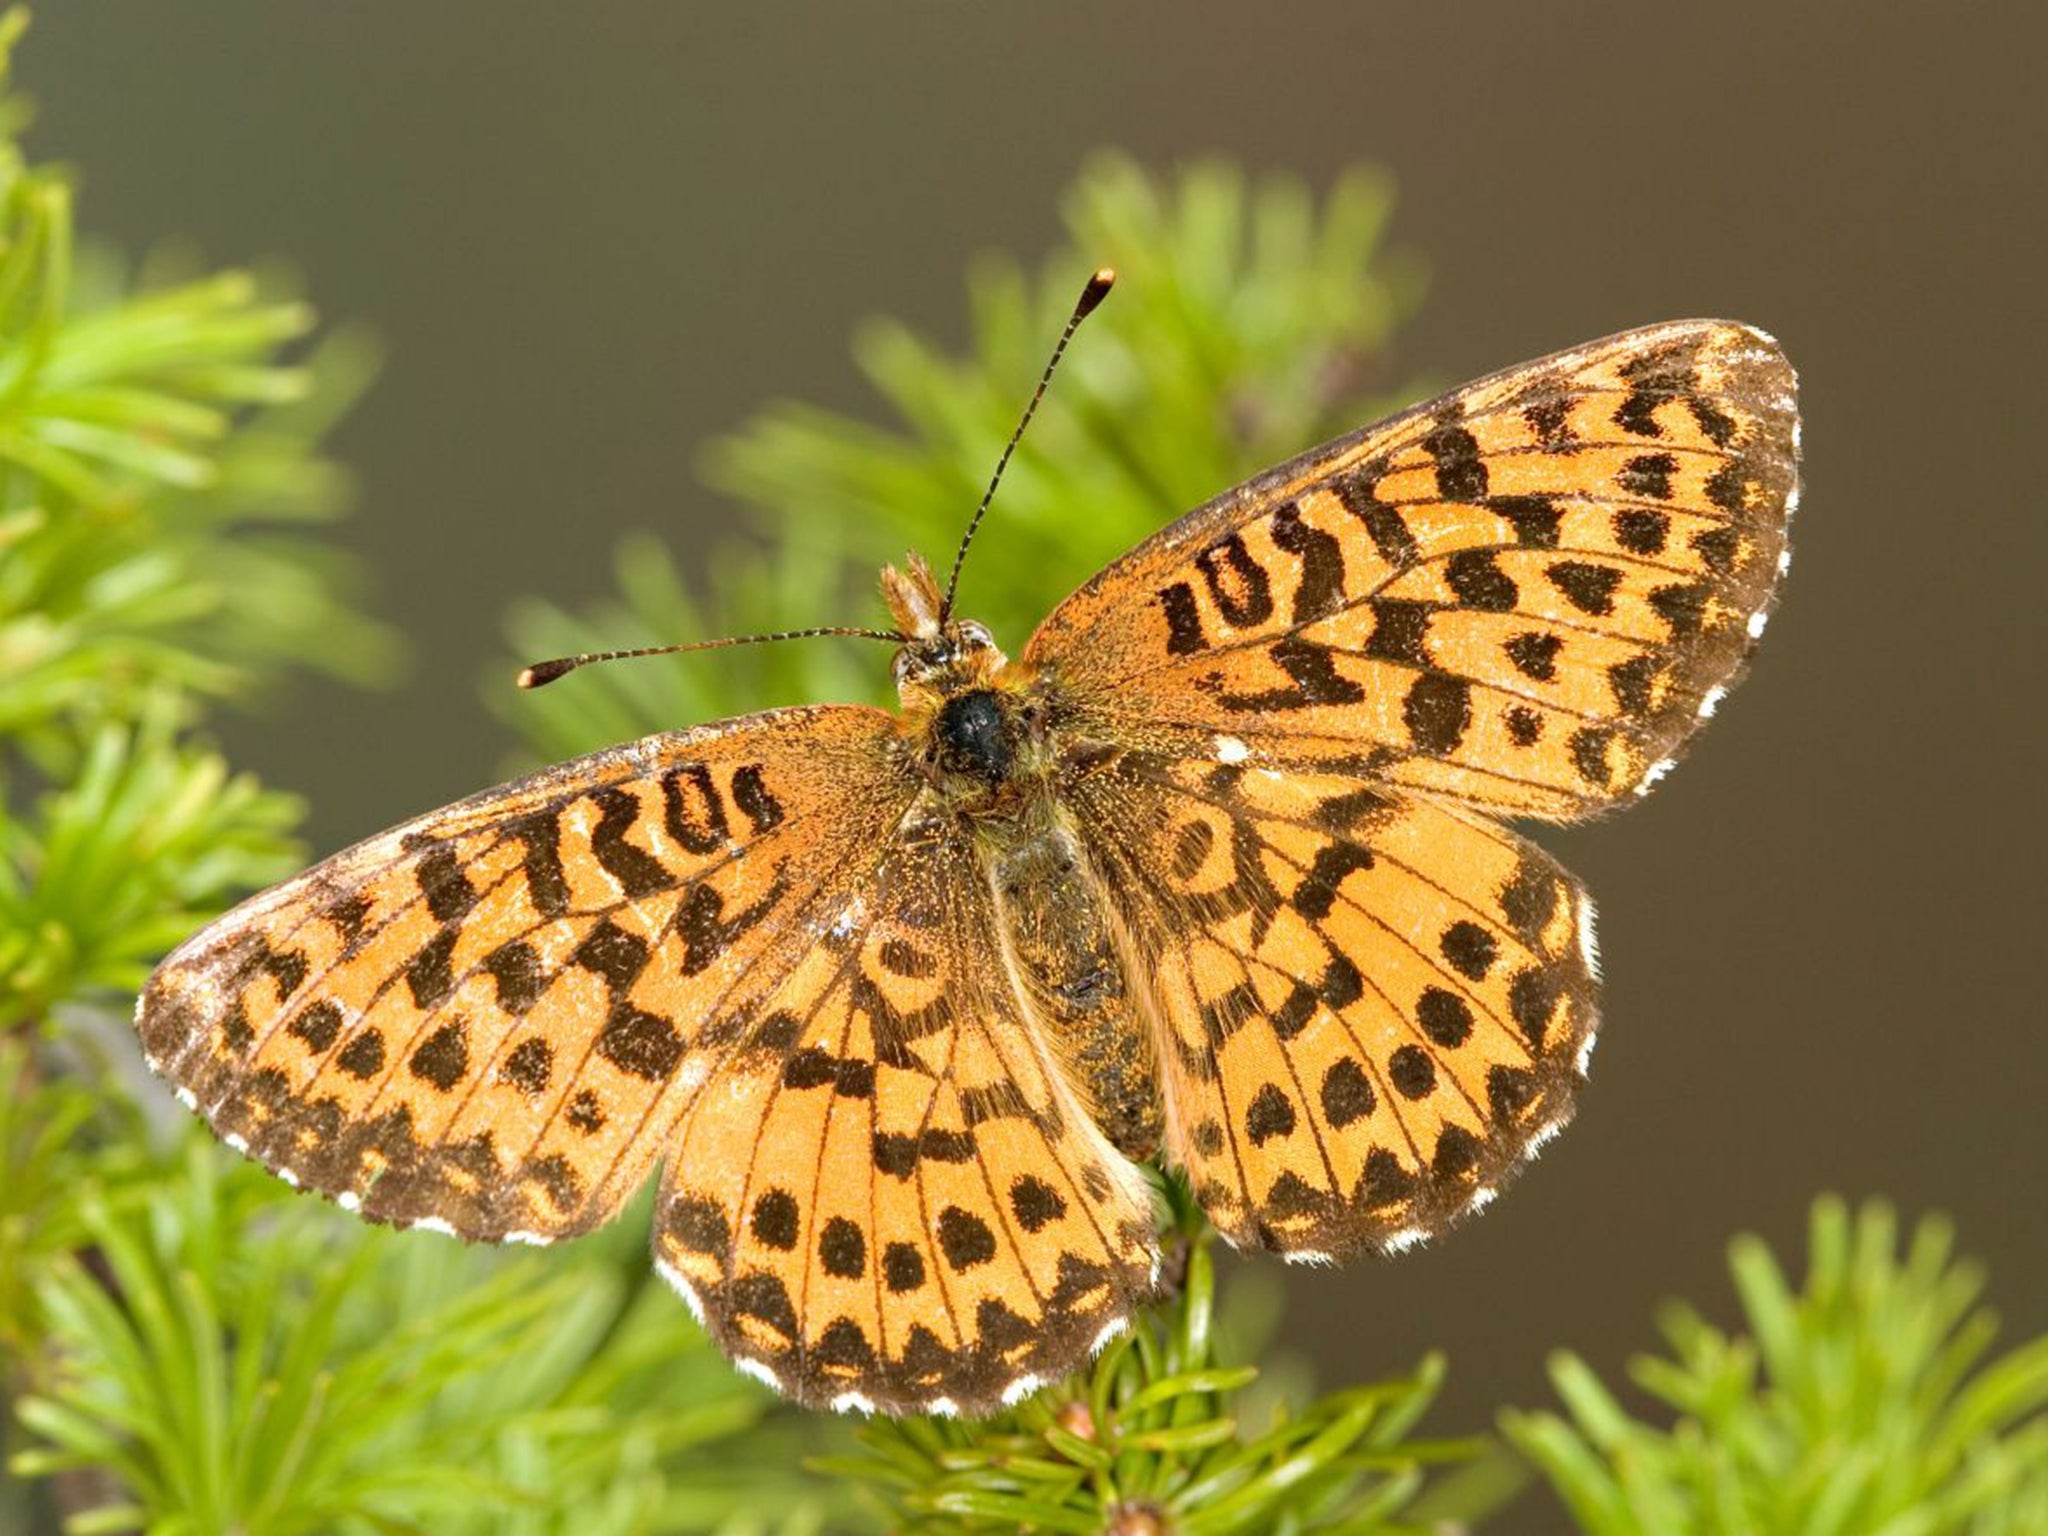 Arctic fritillaries are one of two species whose wings have shrunk as temperatures rise